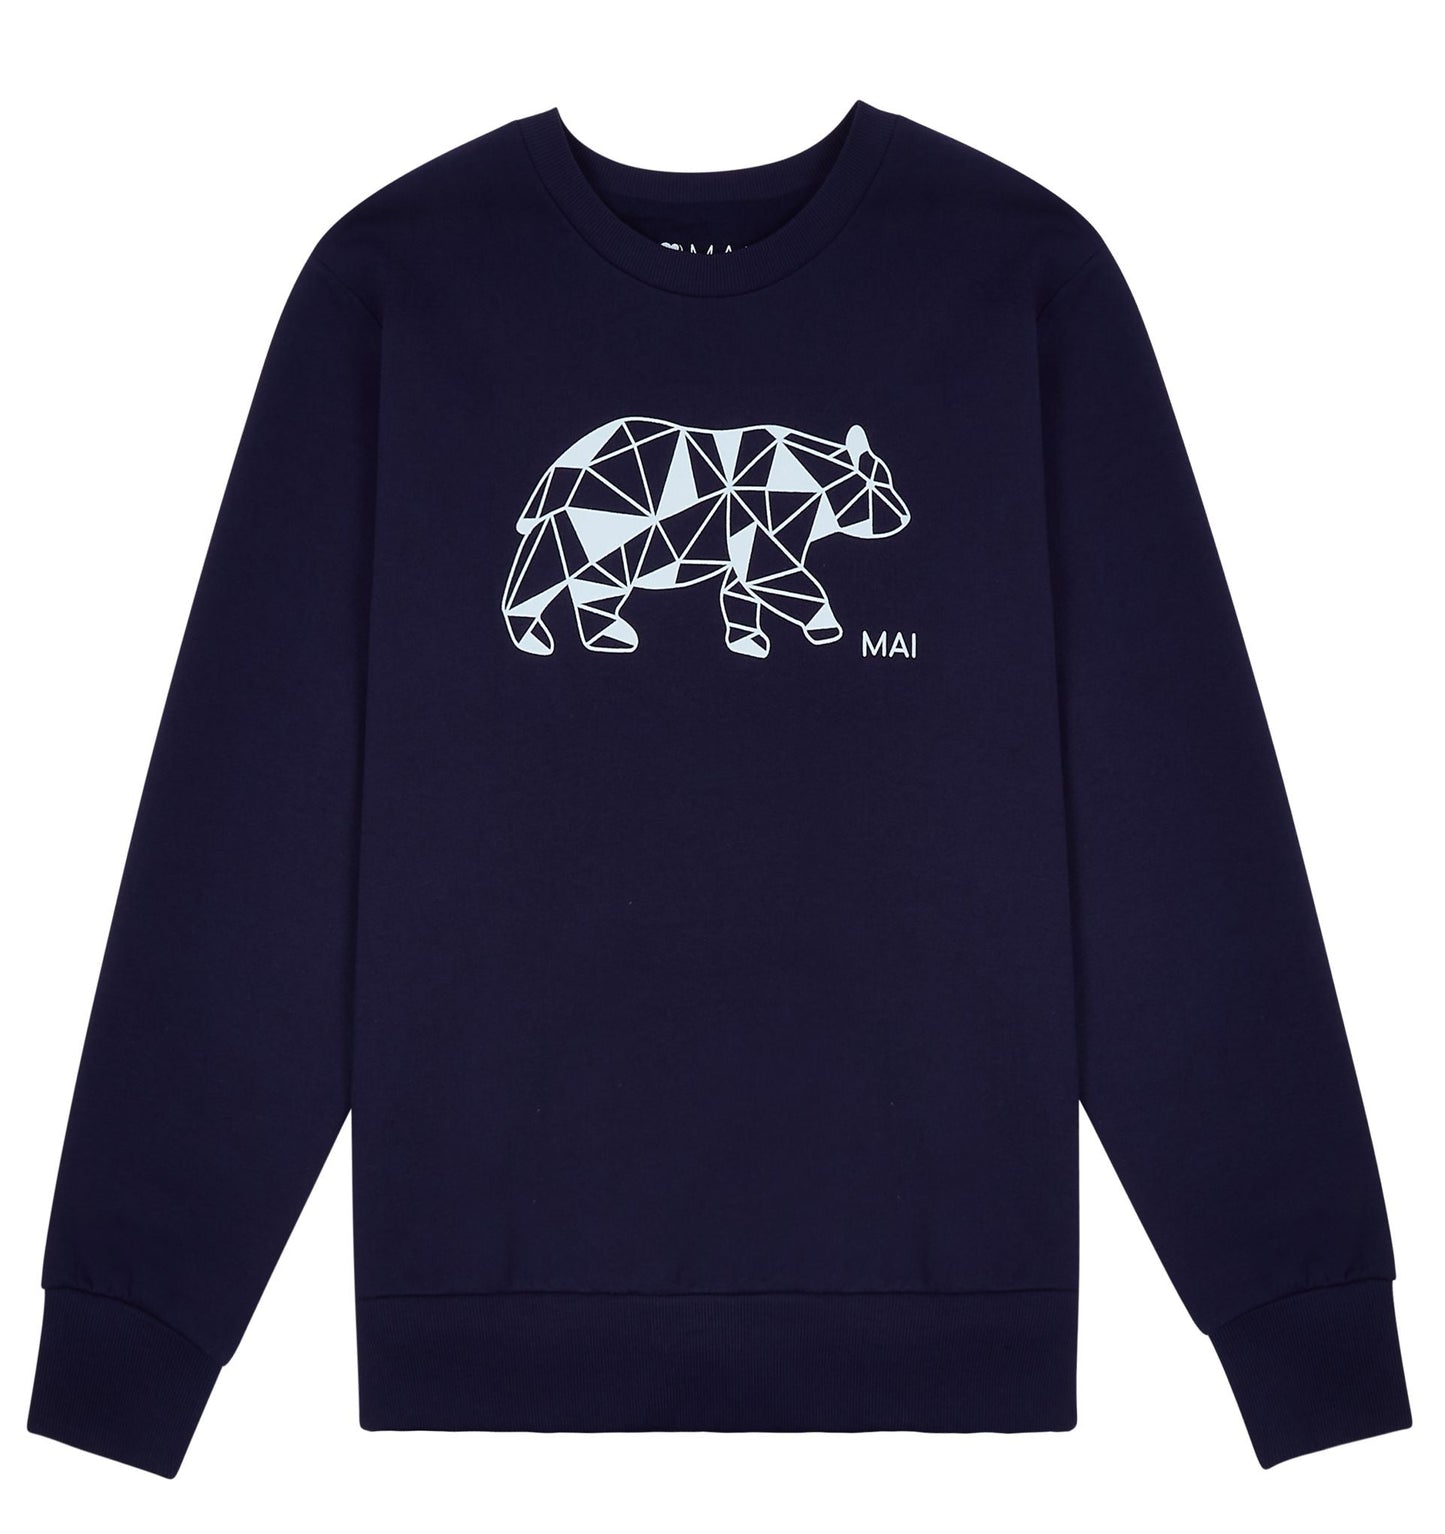 The dark navy sweatshirt against a white background with a white geometrical polar bear on the centre of the front of the shirt.